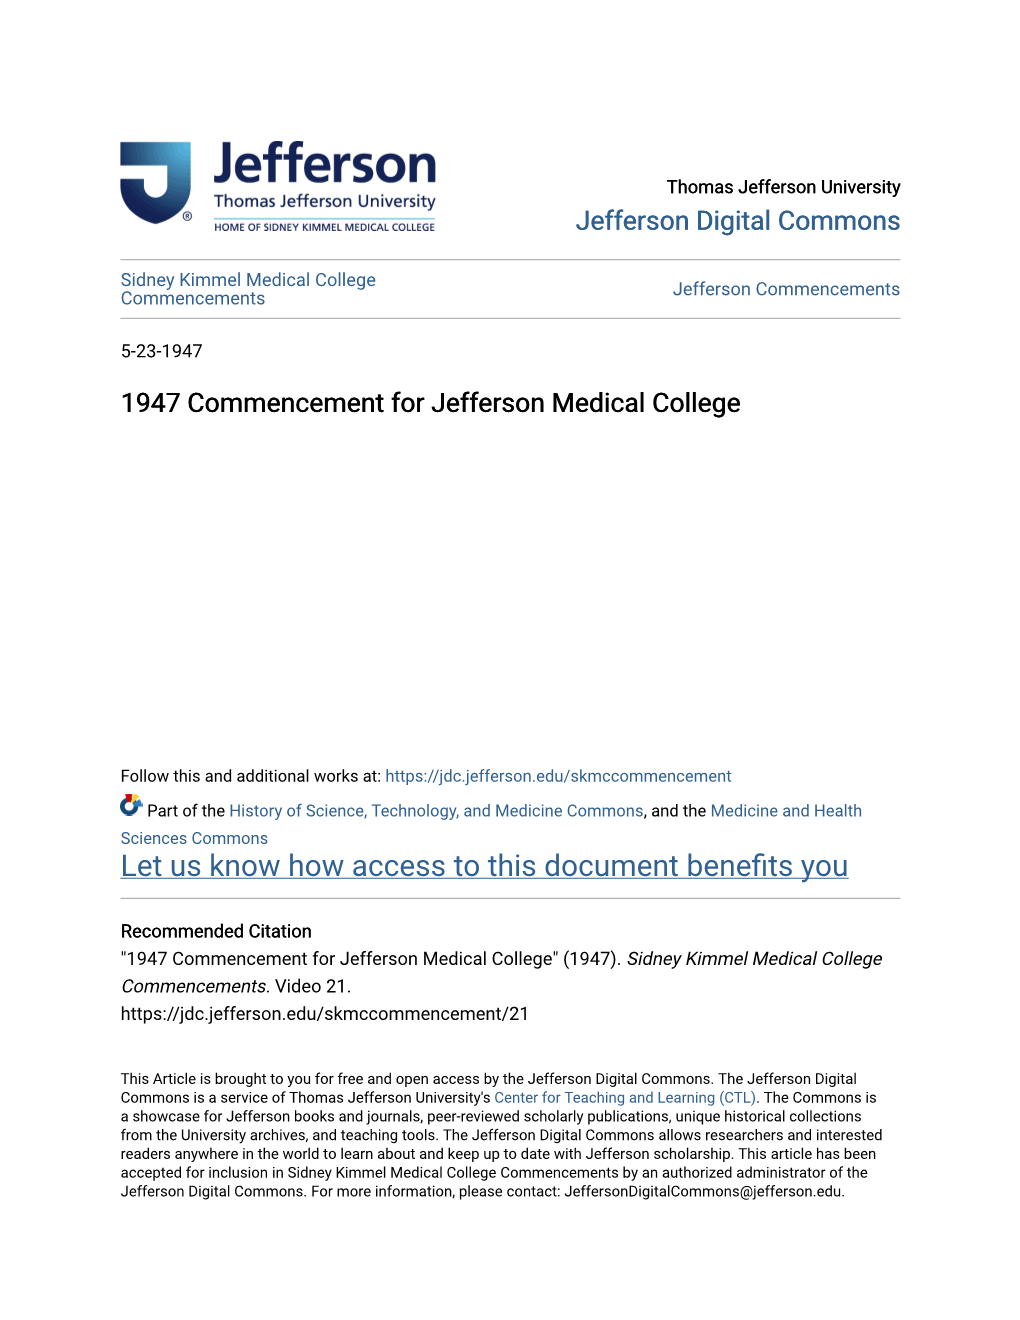 1947 Commencement for Jefferson Medical College